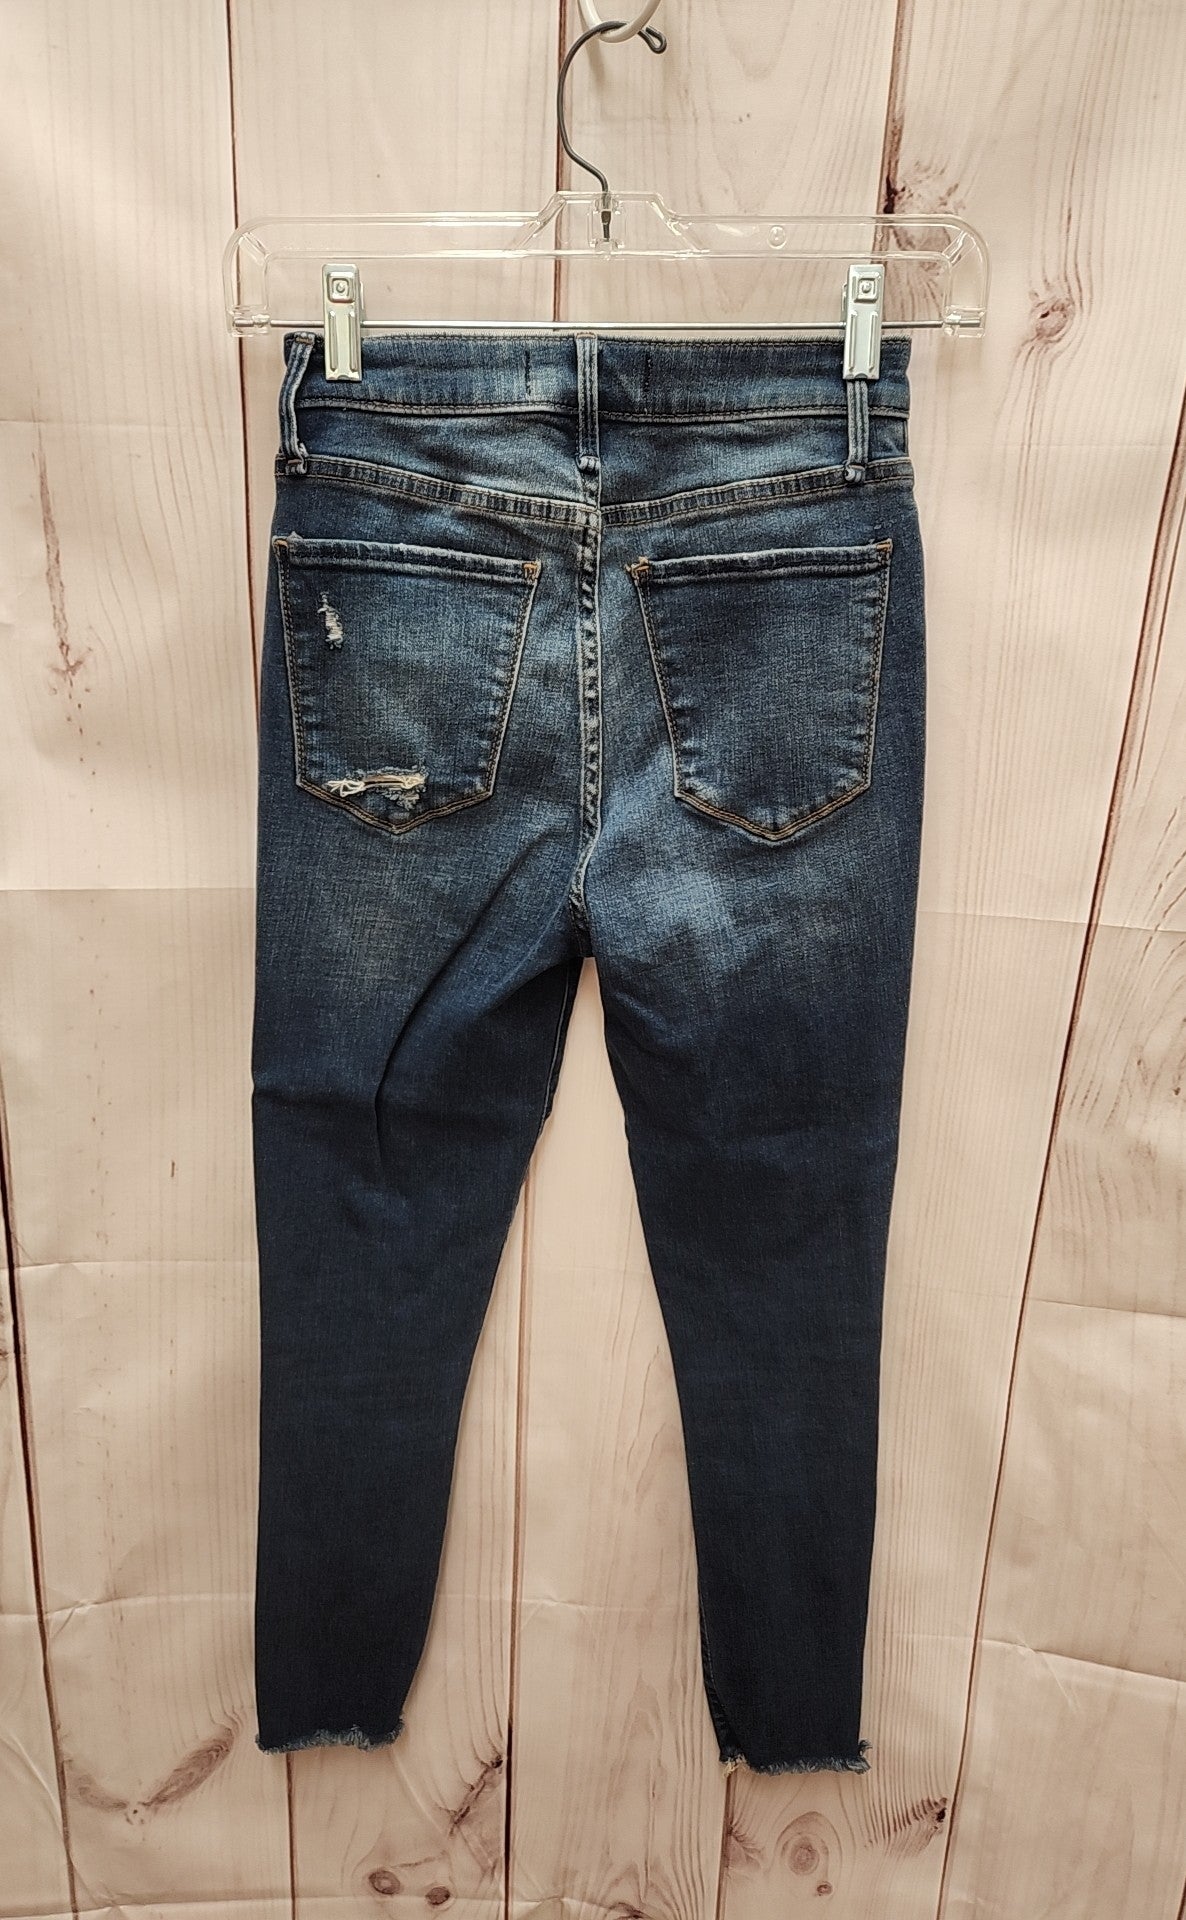 Abercrombie & Fitch Women's Size 25 (0) High Rise Super Skinny Ankle Blue Jeans